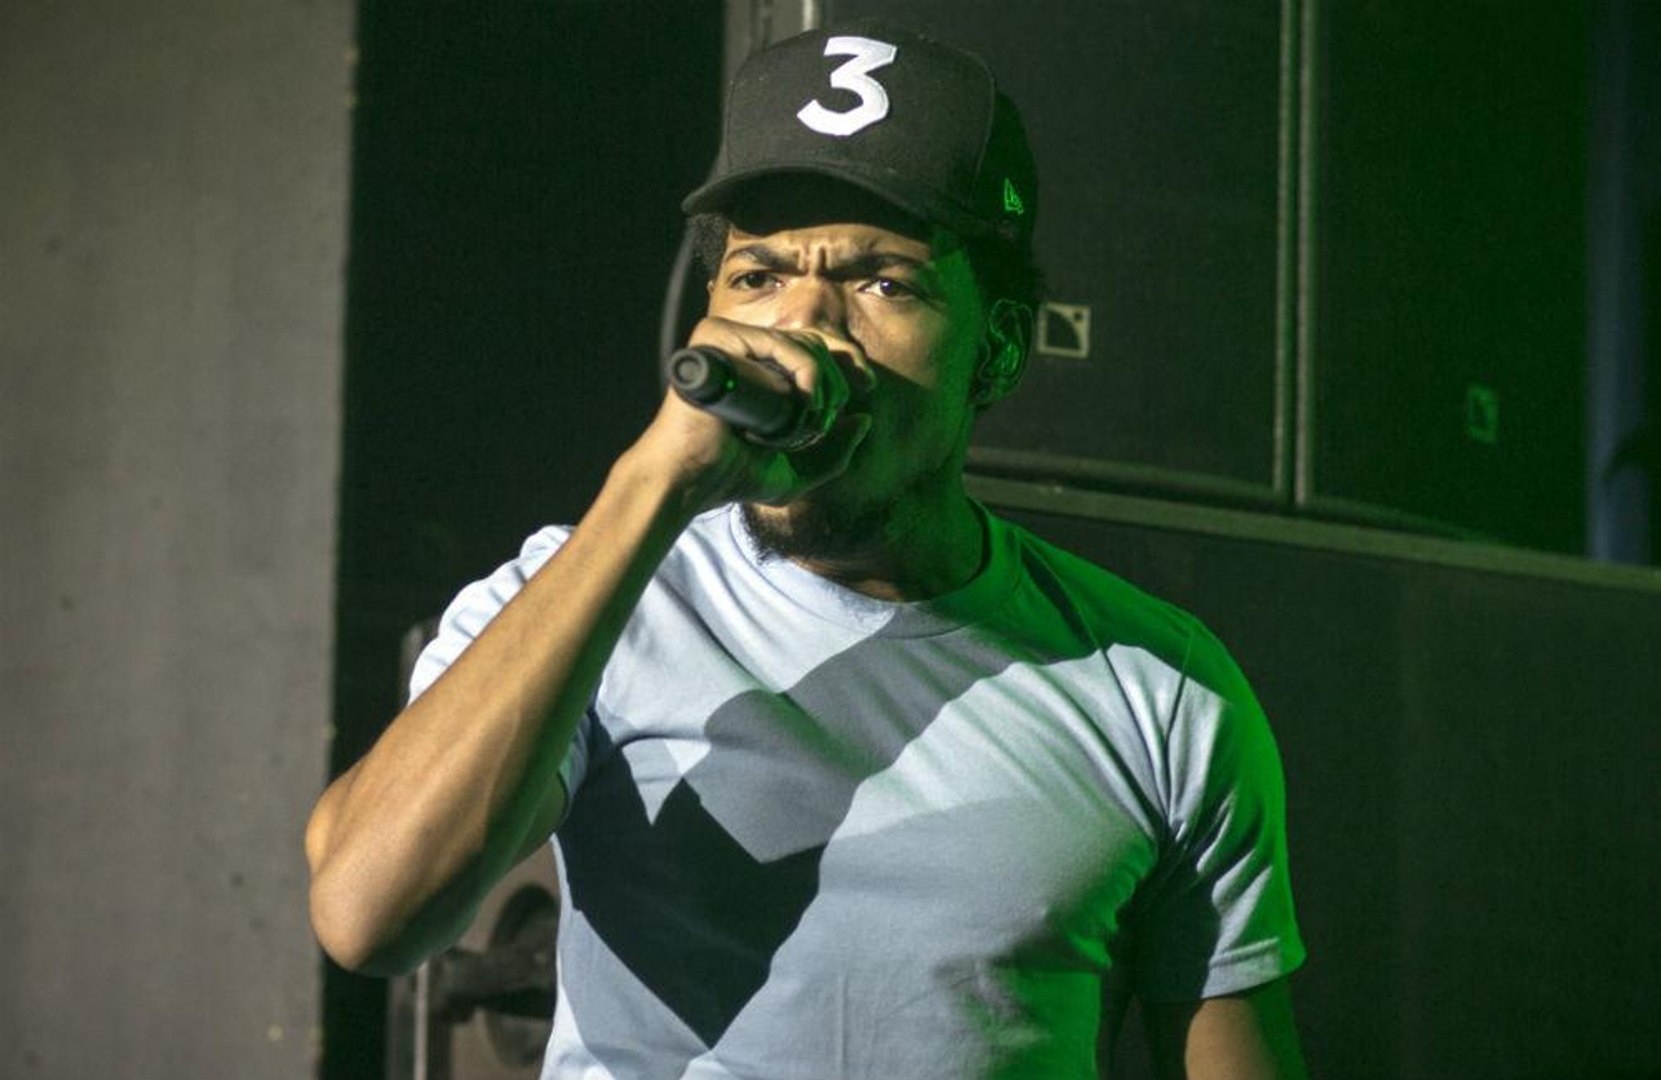 ⁣Chance the Rapper forced to eat vegetable after losing bet